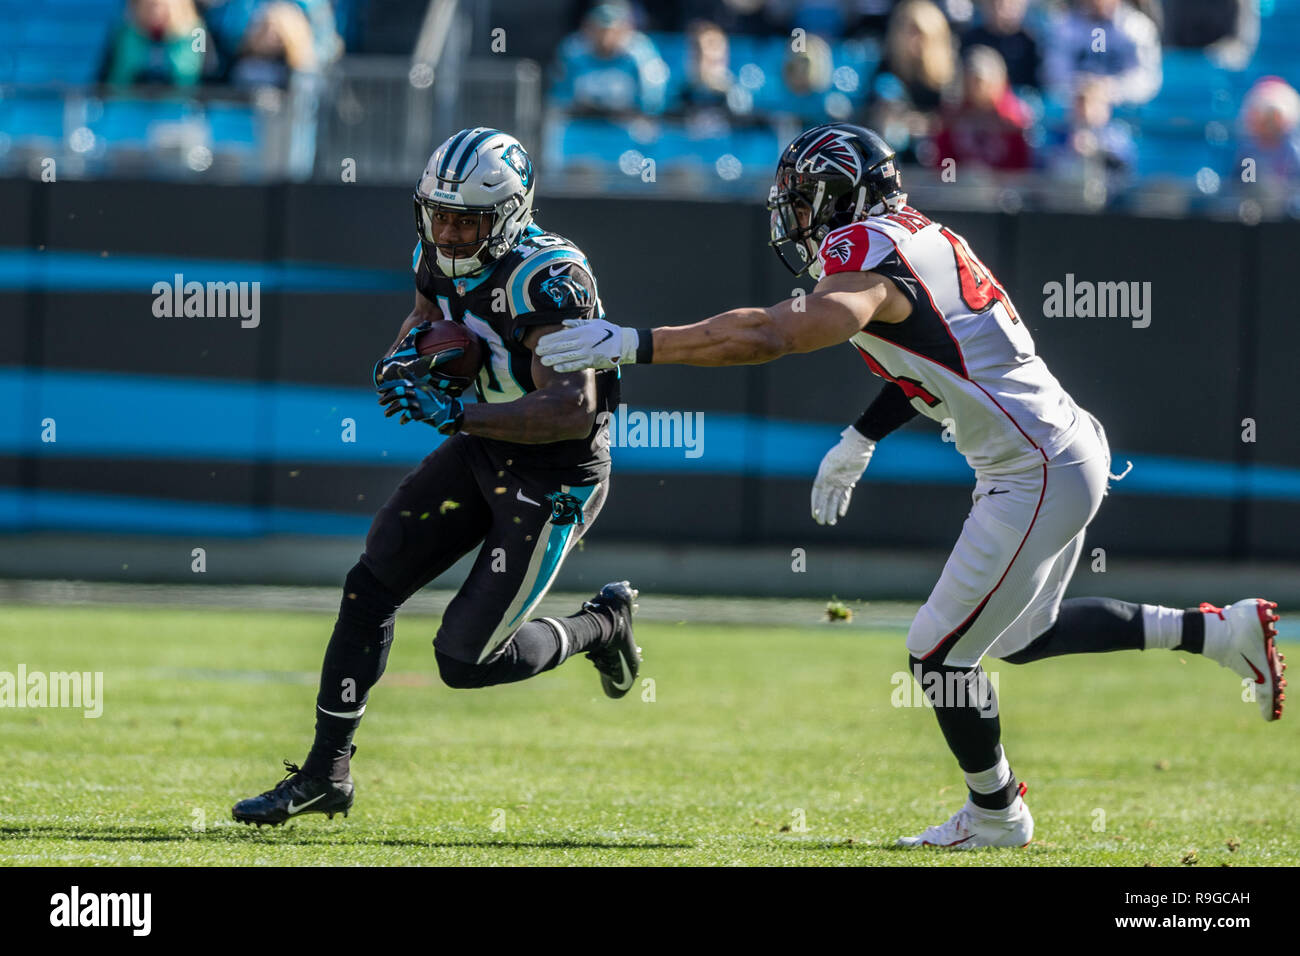 Charlotte, North Carolina, USA. 23rd Dec, 2018. Carolina Panthers wide receiver Curtis Samuel (10) during game action at Bank of America Stadium in Charlotte, NC. Atlanta Falcons go on to win 24 to 10 over the Carolina Panthers. Credit: Jason Walle/ZUMA Wire/Alamy Live News Stock Photo